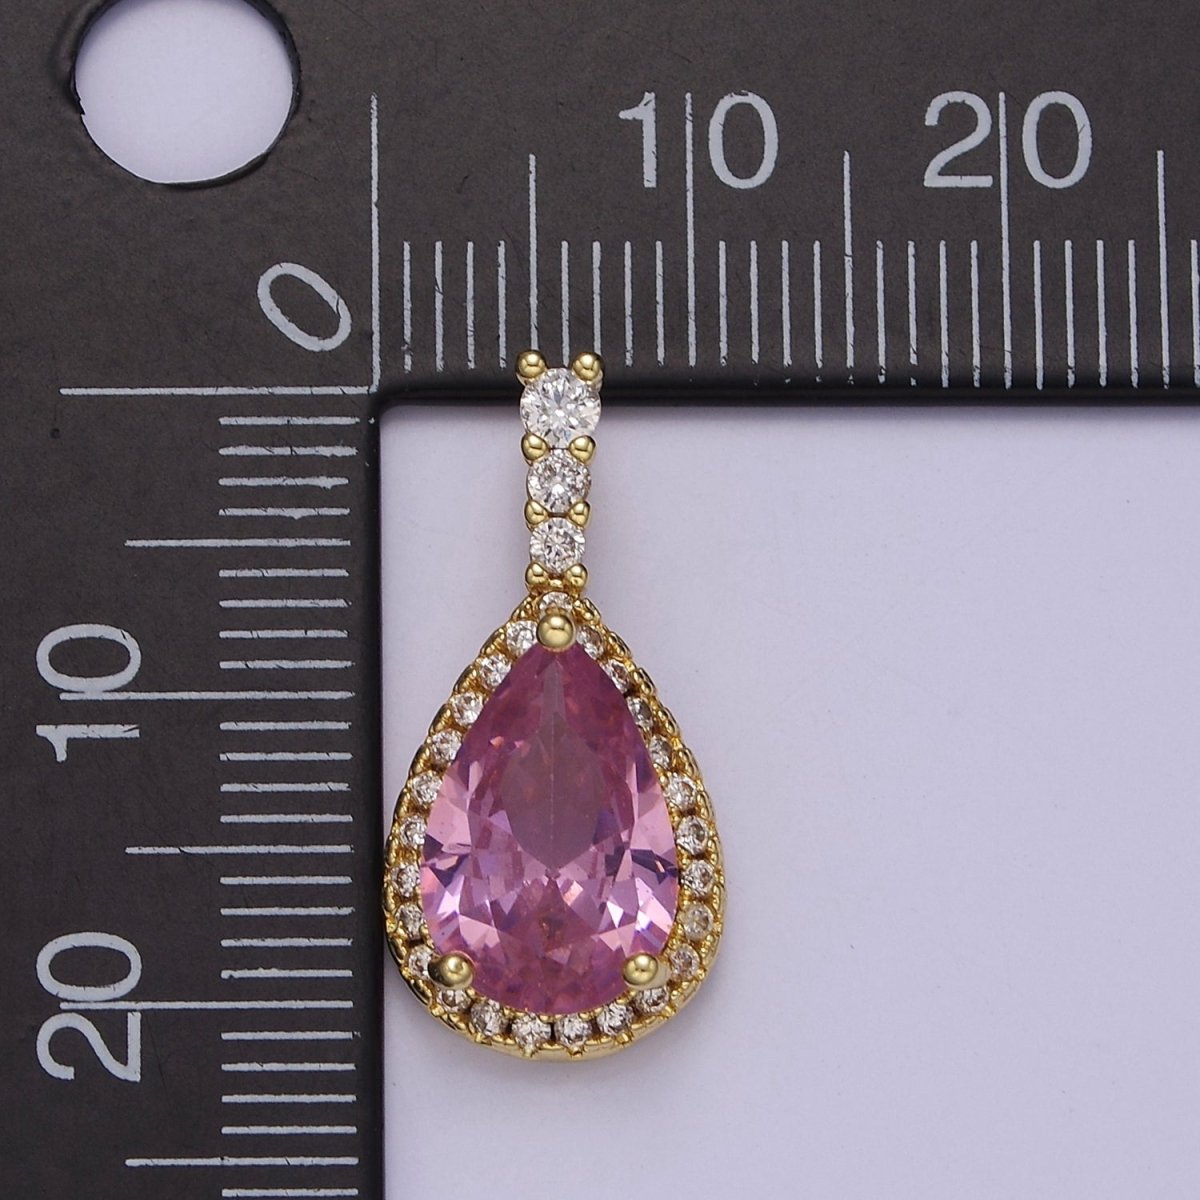 Micro Pave Teardrop Pink, Clear, Black Cubic Zirconia CZ Pendant Charm For Jewelry Necklace Making, J-562 J-564 J-565 - DLUXCA